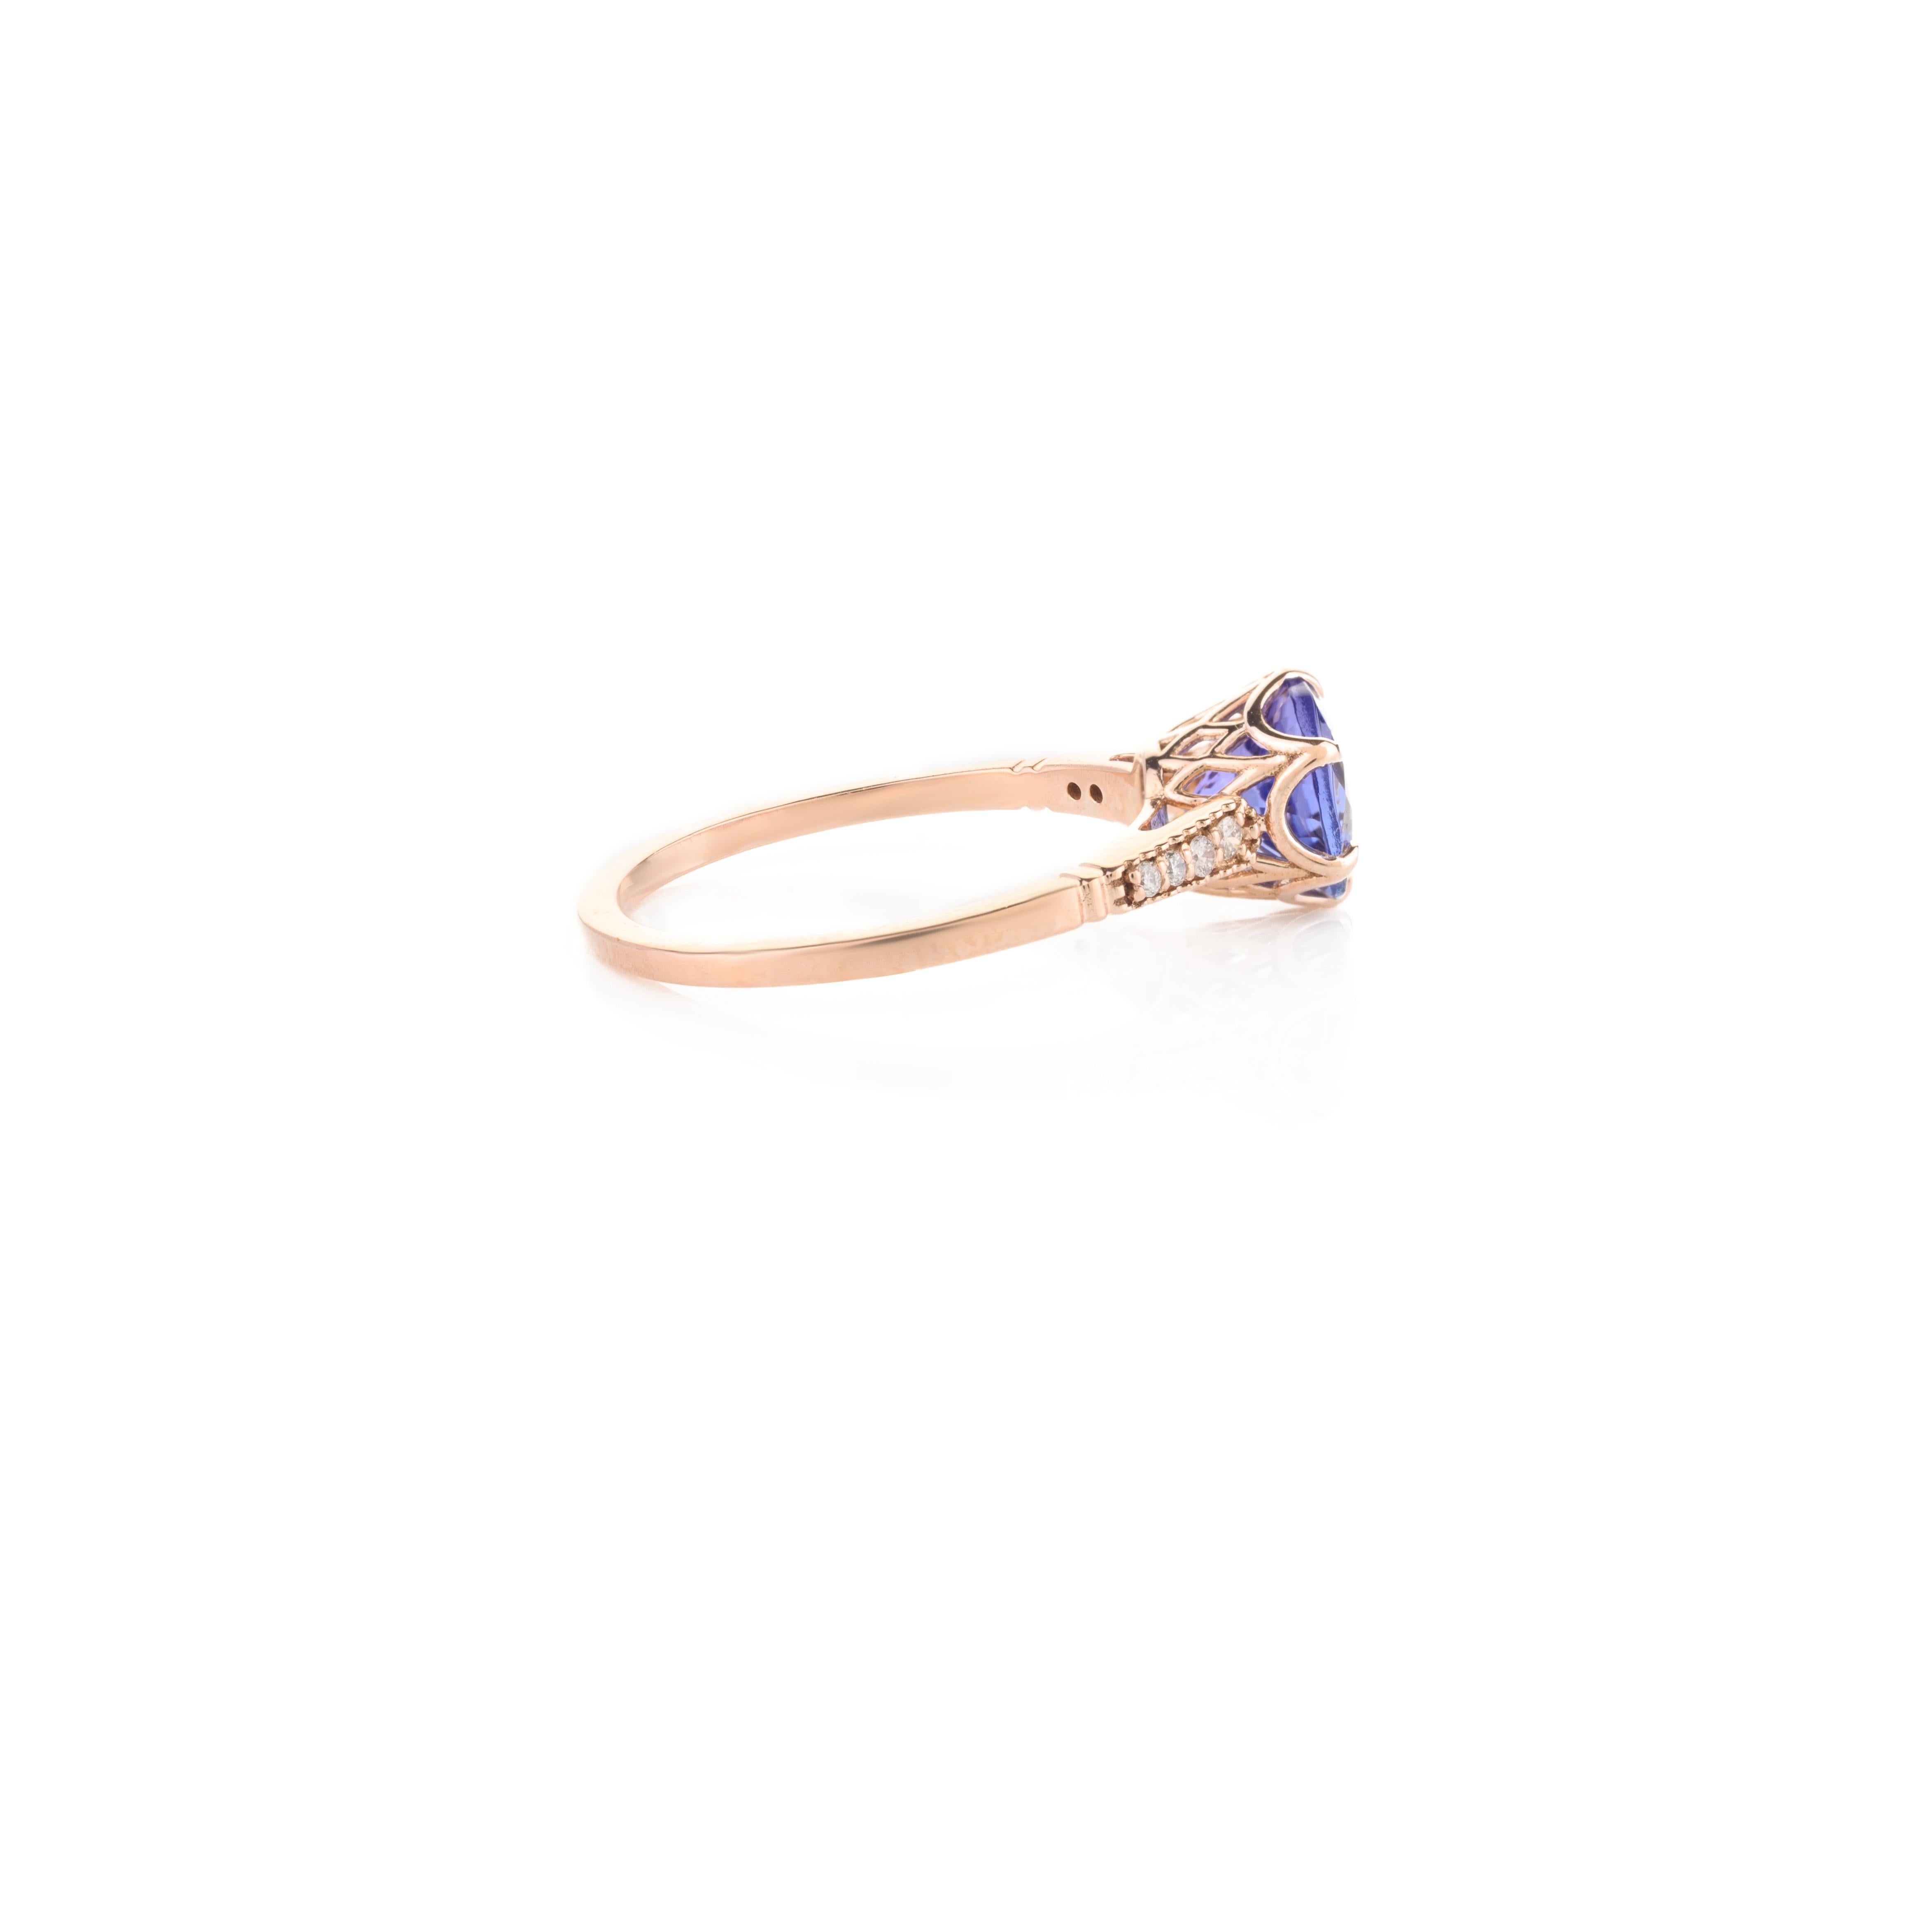 For Sale:  Genuine 1.68 Cts Tanzanite and Diamond Engagement Ring in 18k Solid Rose Gold 6